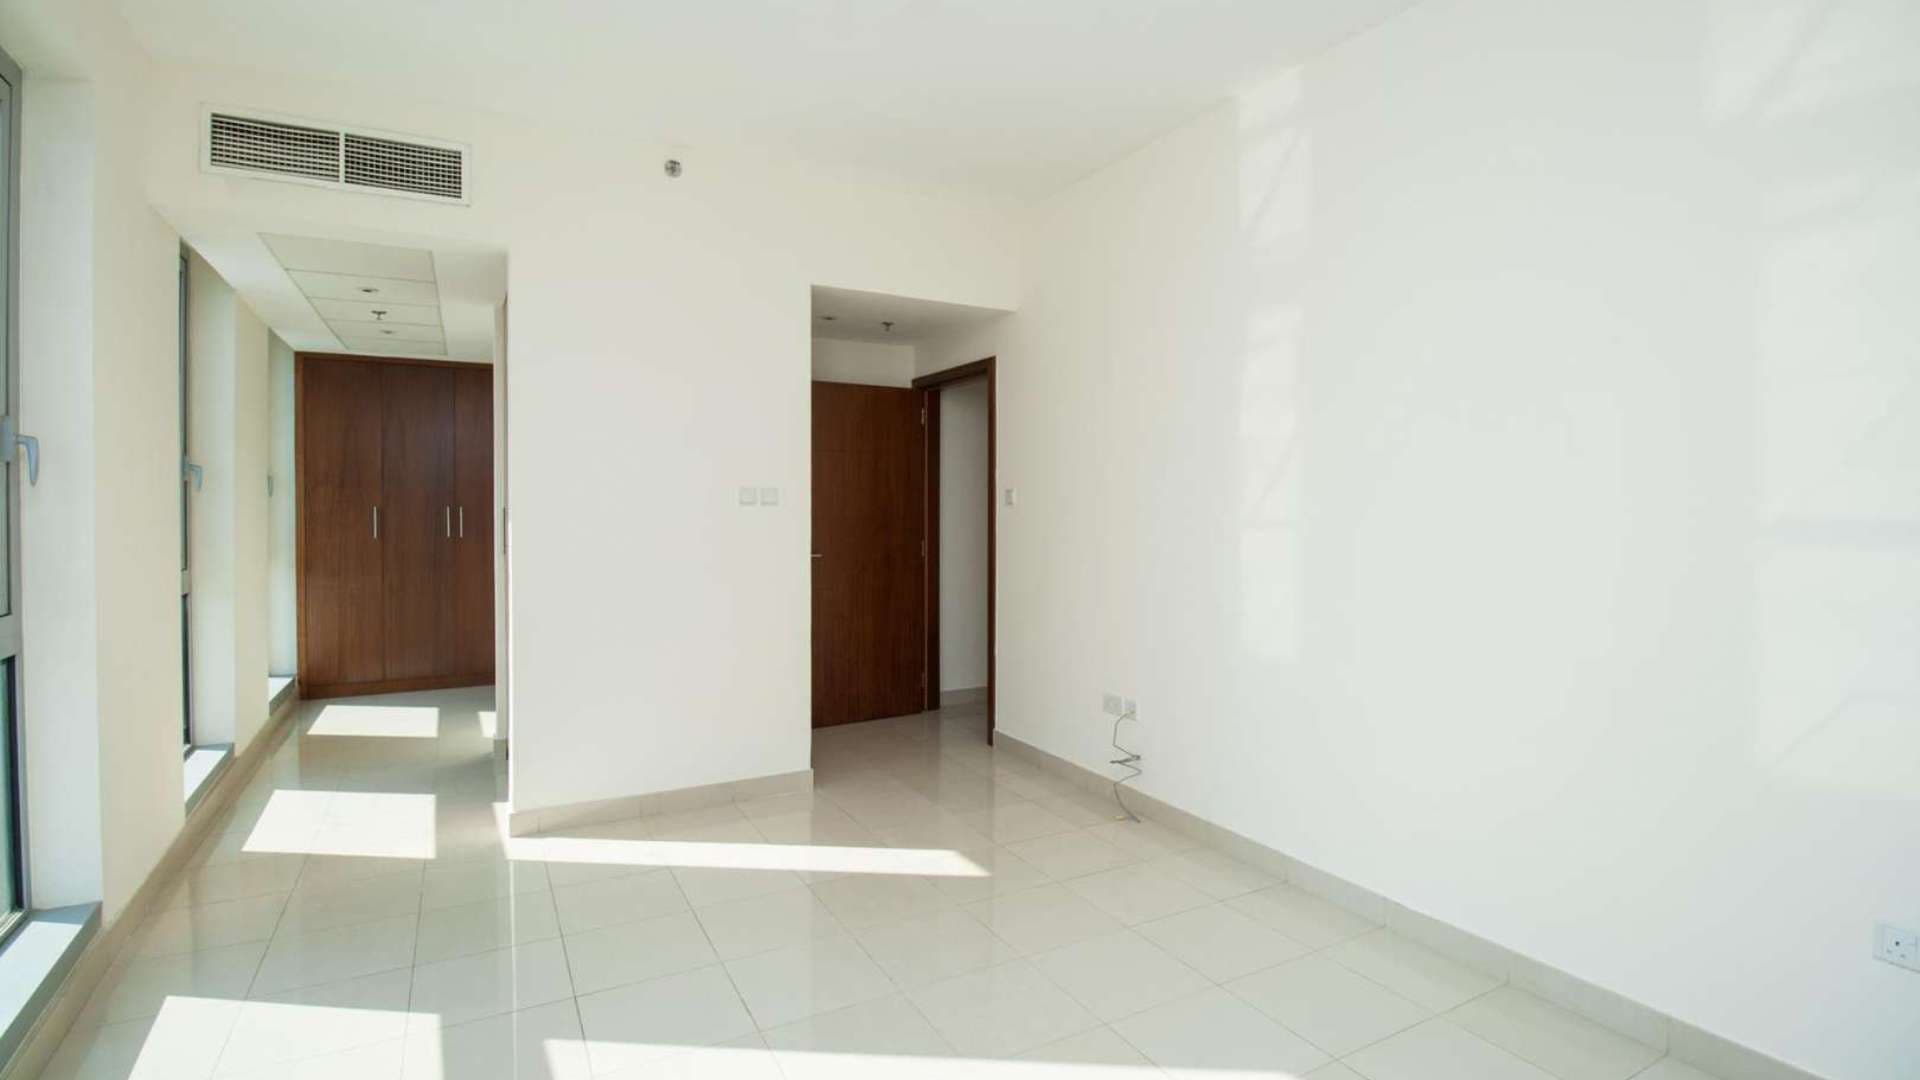 1 Bedroom Apartment For Rent Standpoint Tower A Lp10239 197b0f54004efb00.jpg